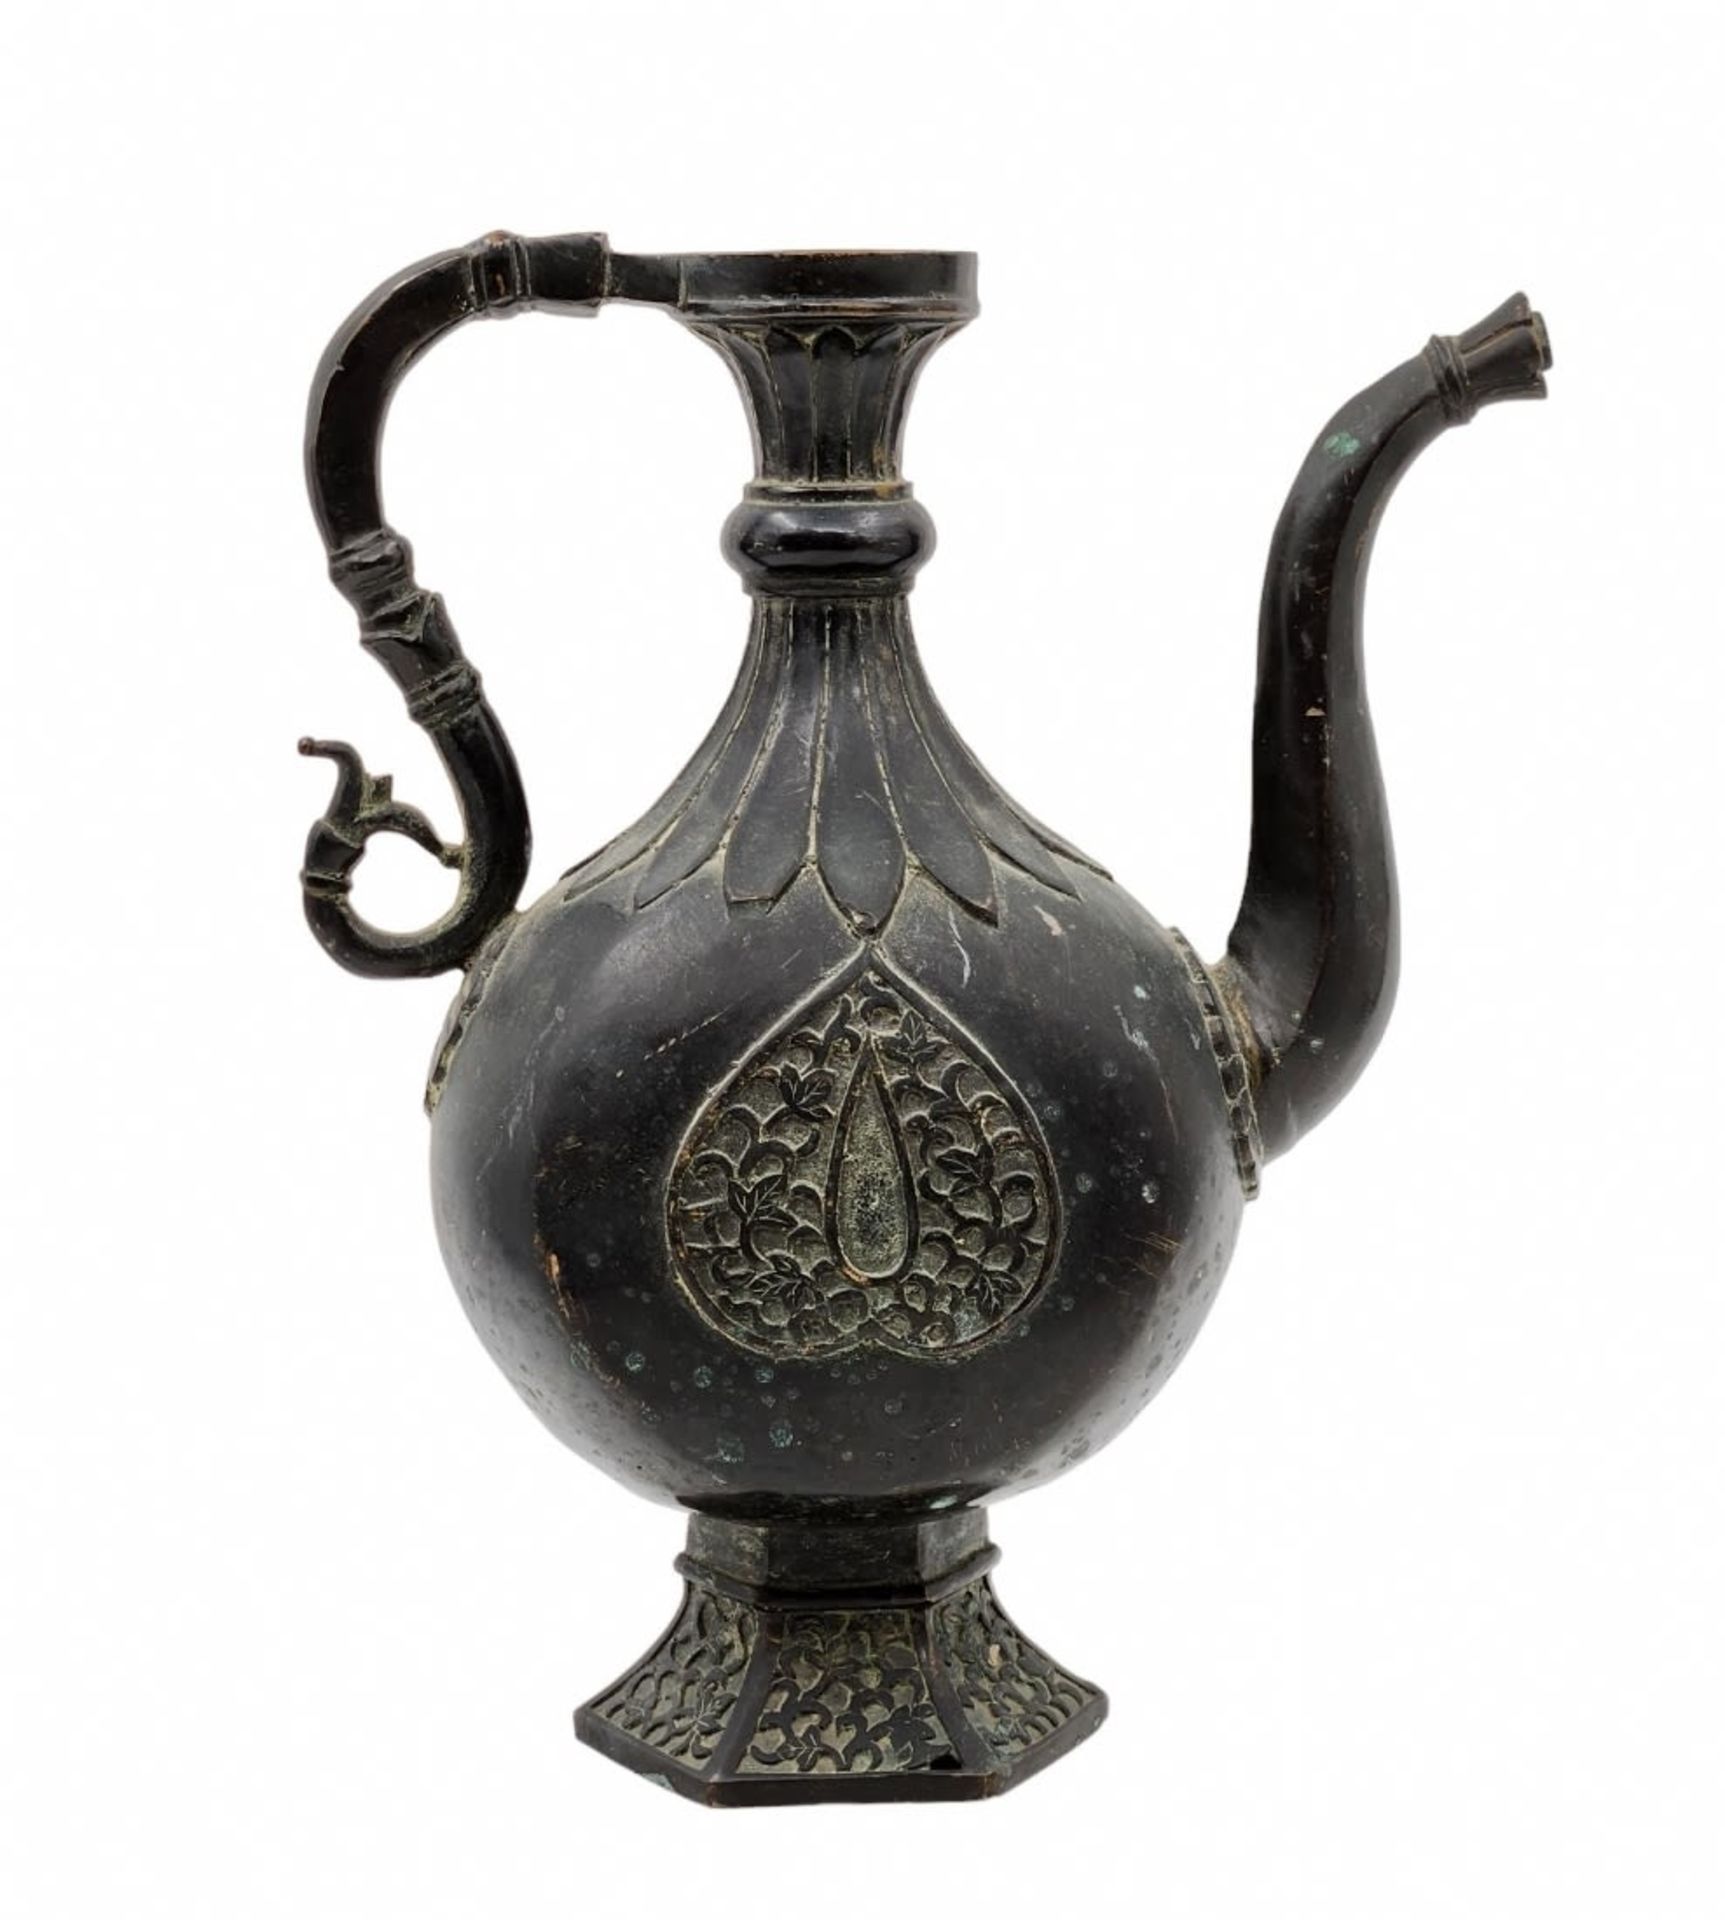 Chinese jug made of blackened brass, made in the style of ancient Indian jugs produced in the 17th - Bild 2 aus 5